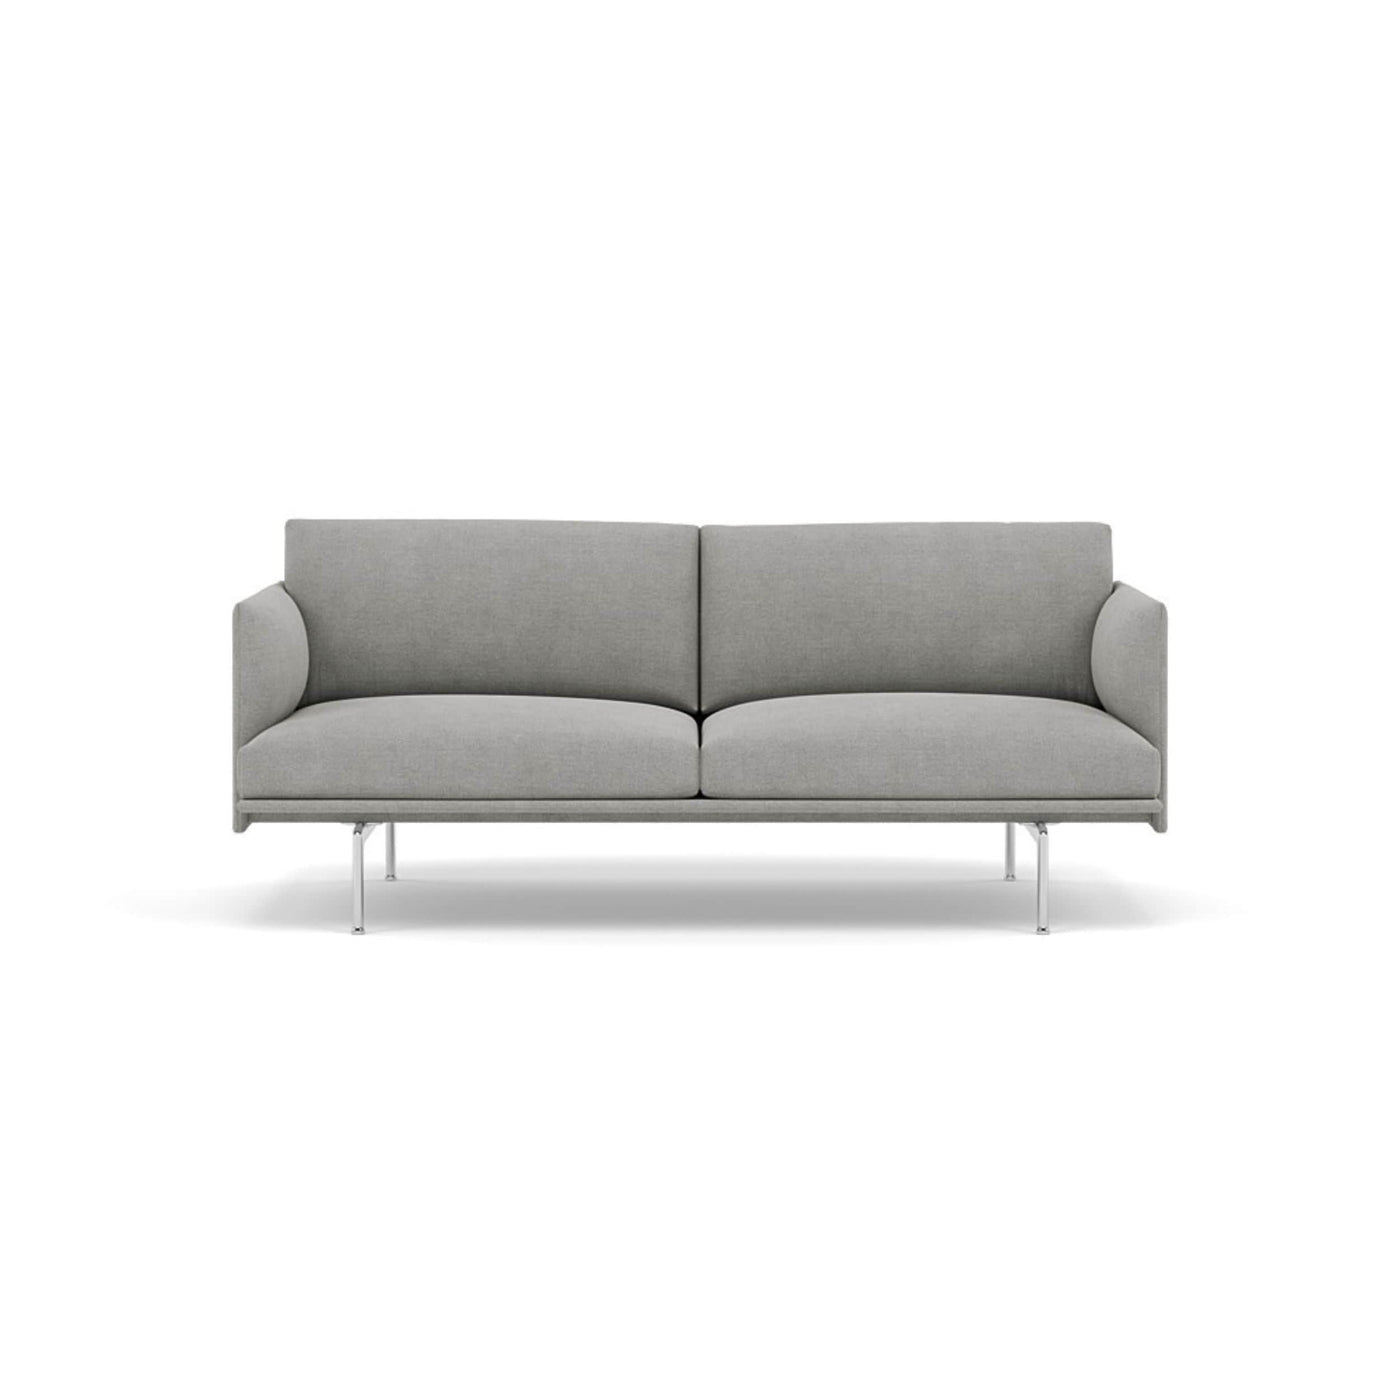 Muuto Outline Studio Sofa 170 in Fiord 151 and polished aluminium legs. Made to order from someday designs. #colour_fiord-151